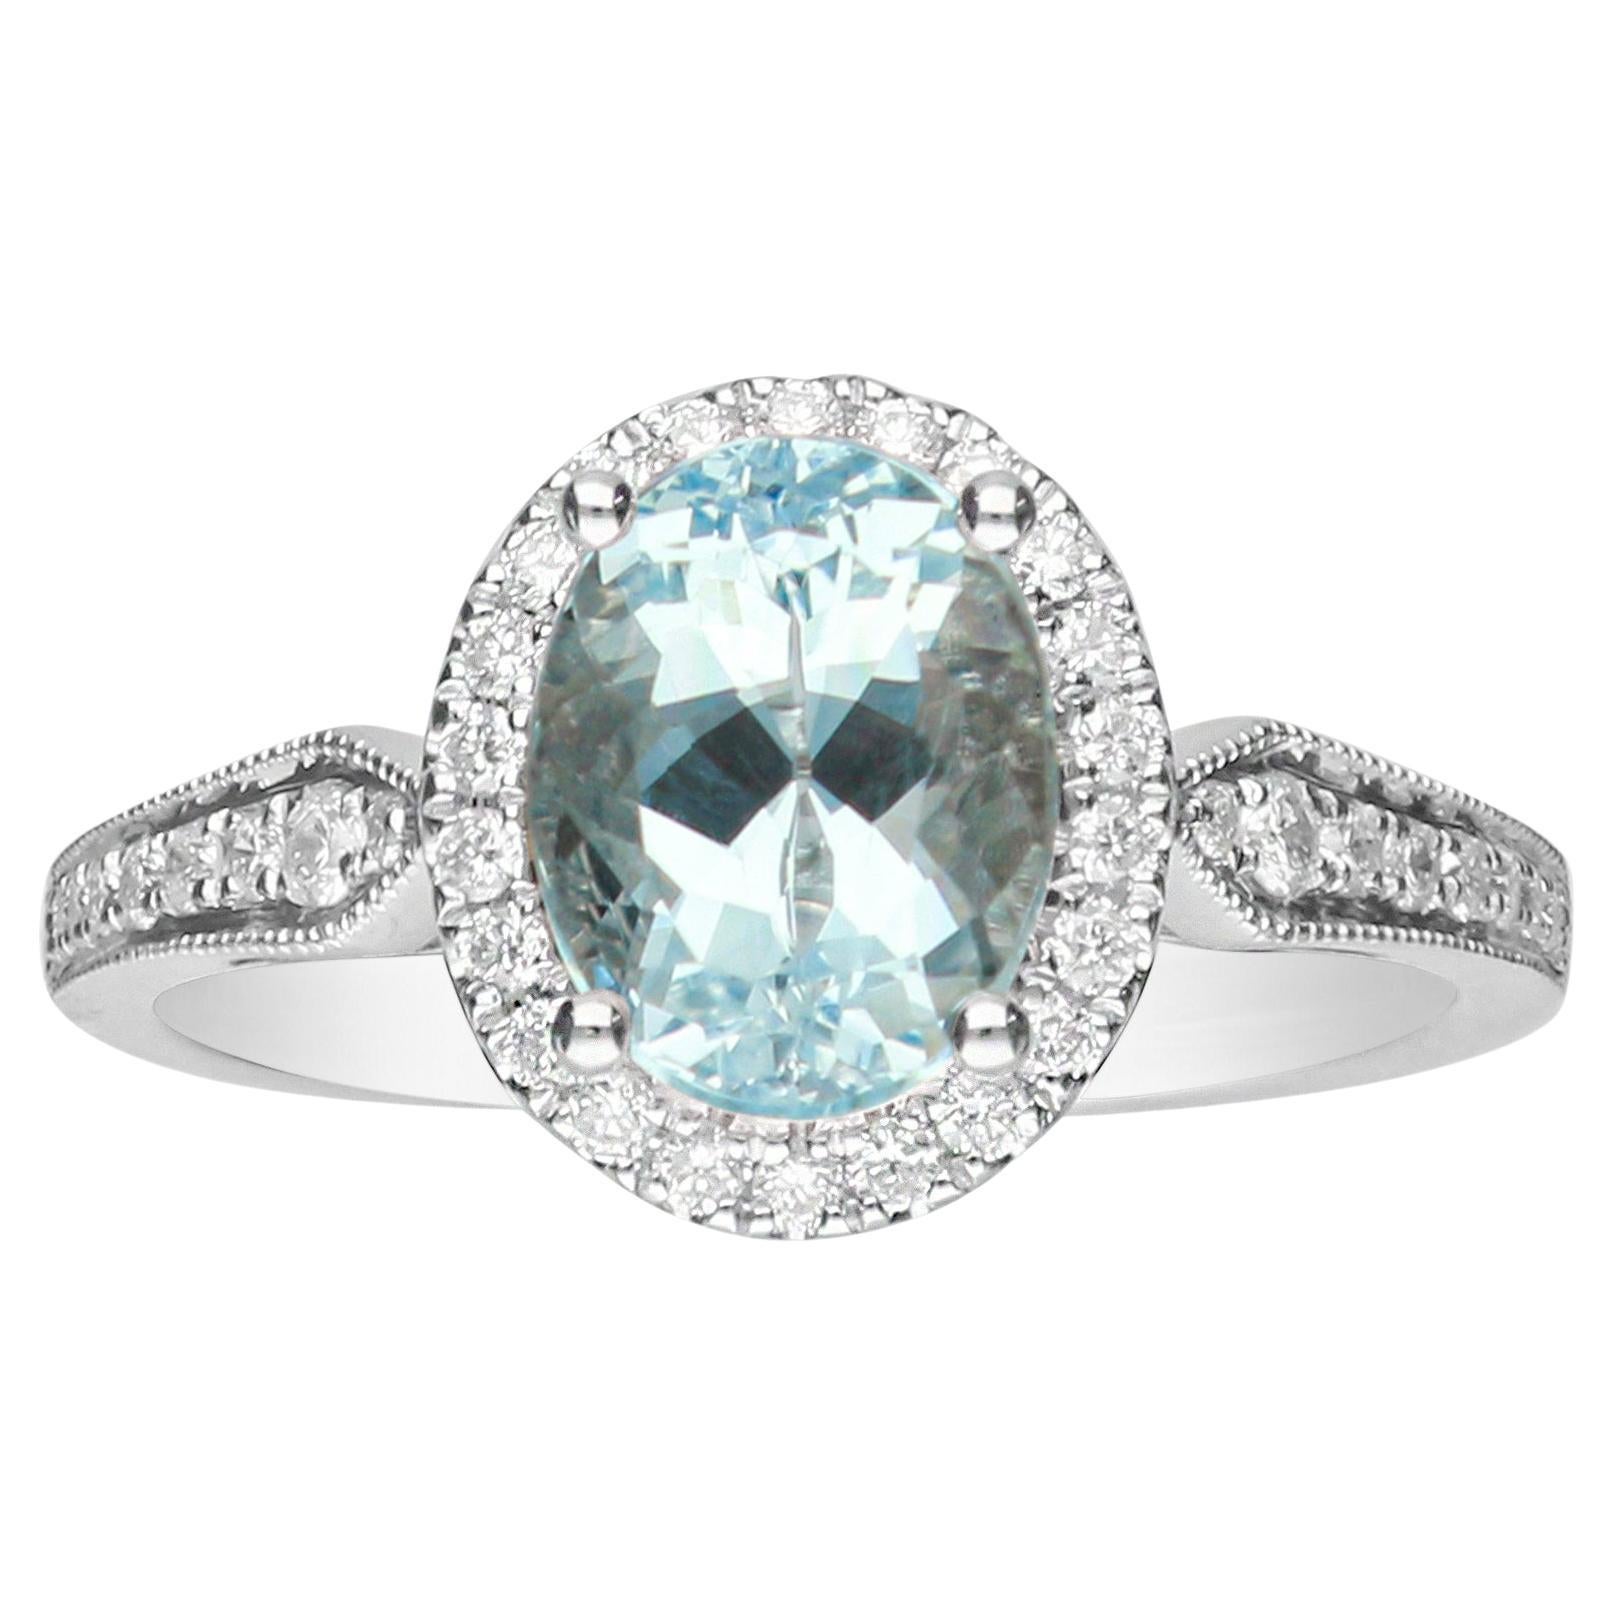 1.71 Carat Oval-Cut Aquamarine Diamond Accents 14K White Gold Ring For Sale